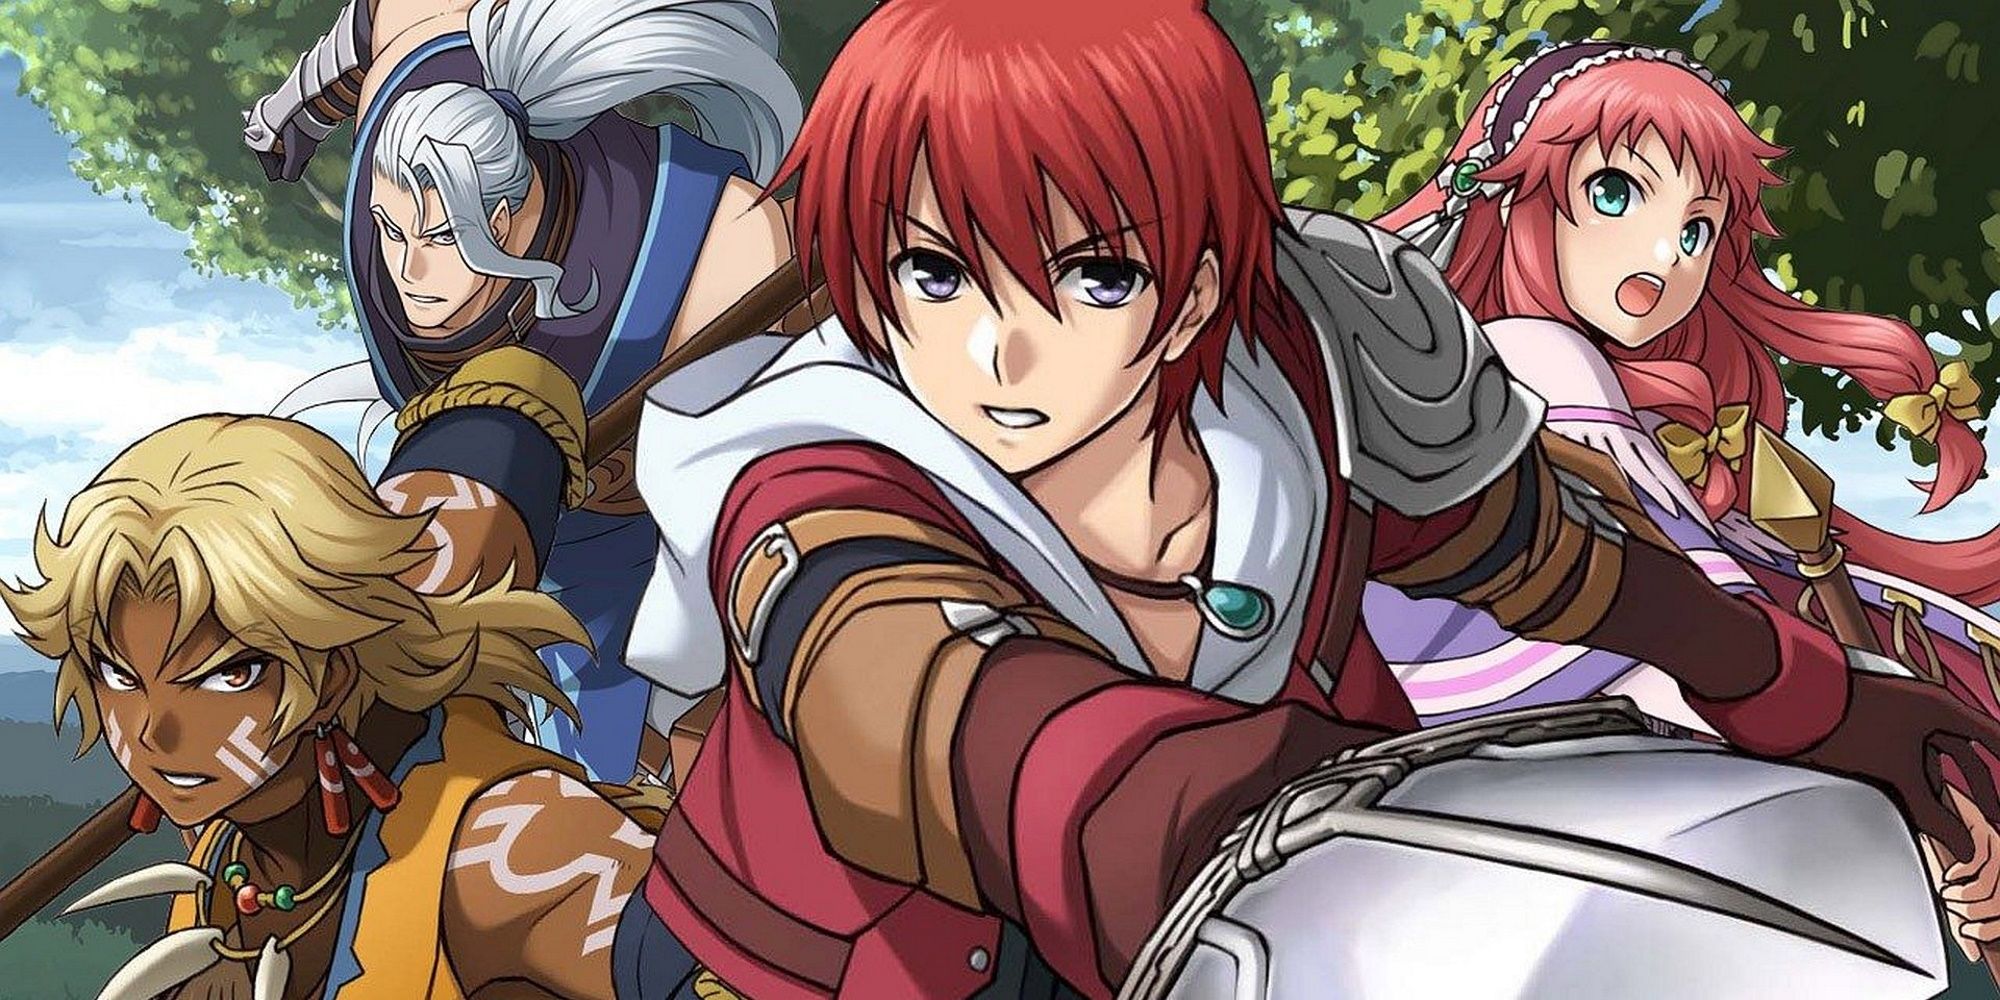 Ys 10: Nordics' Limited Edition Announced